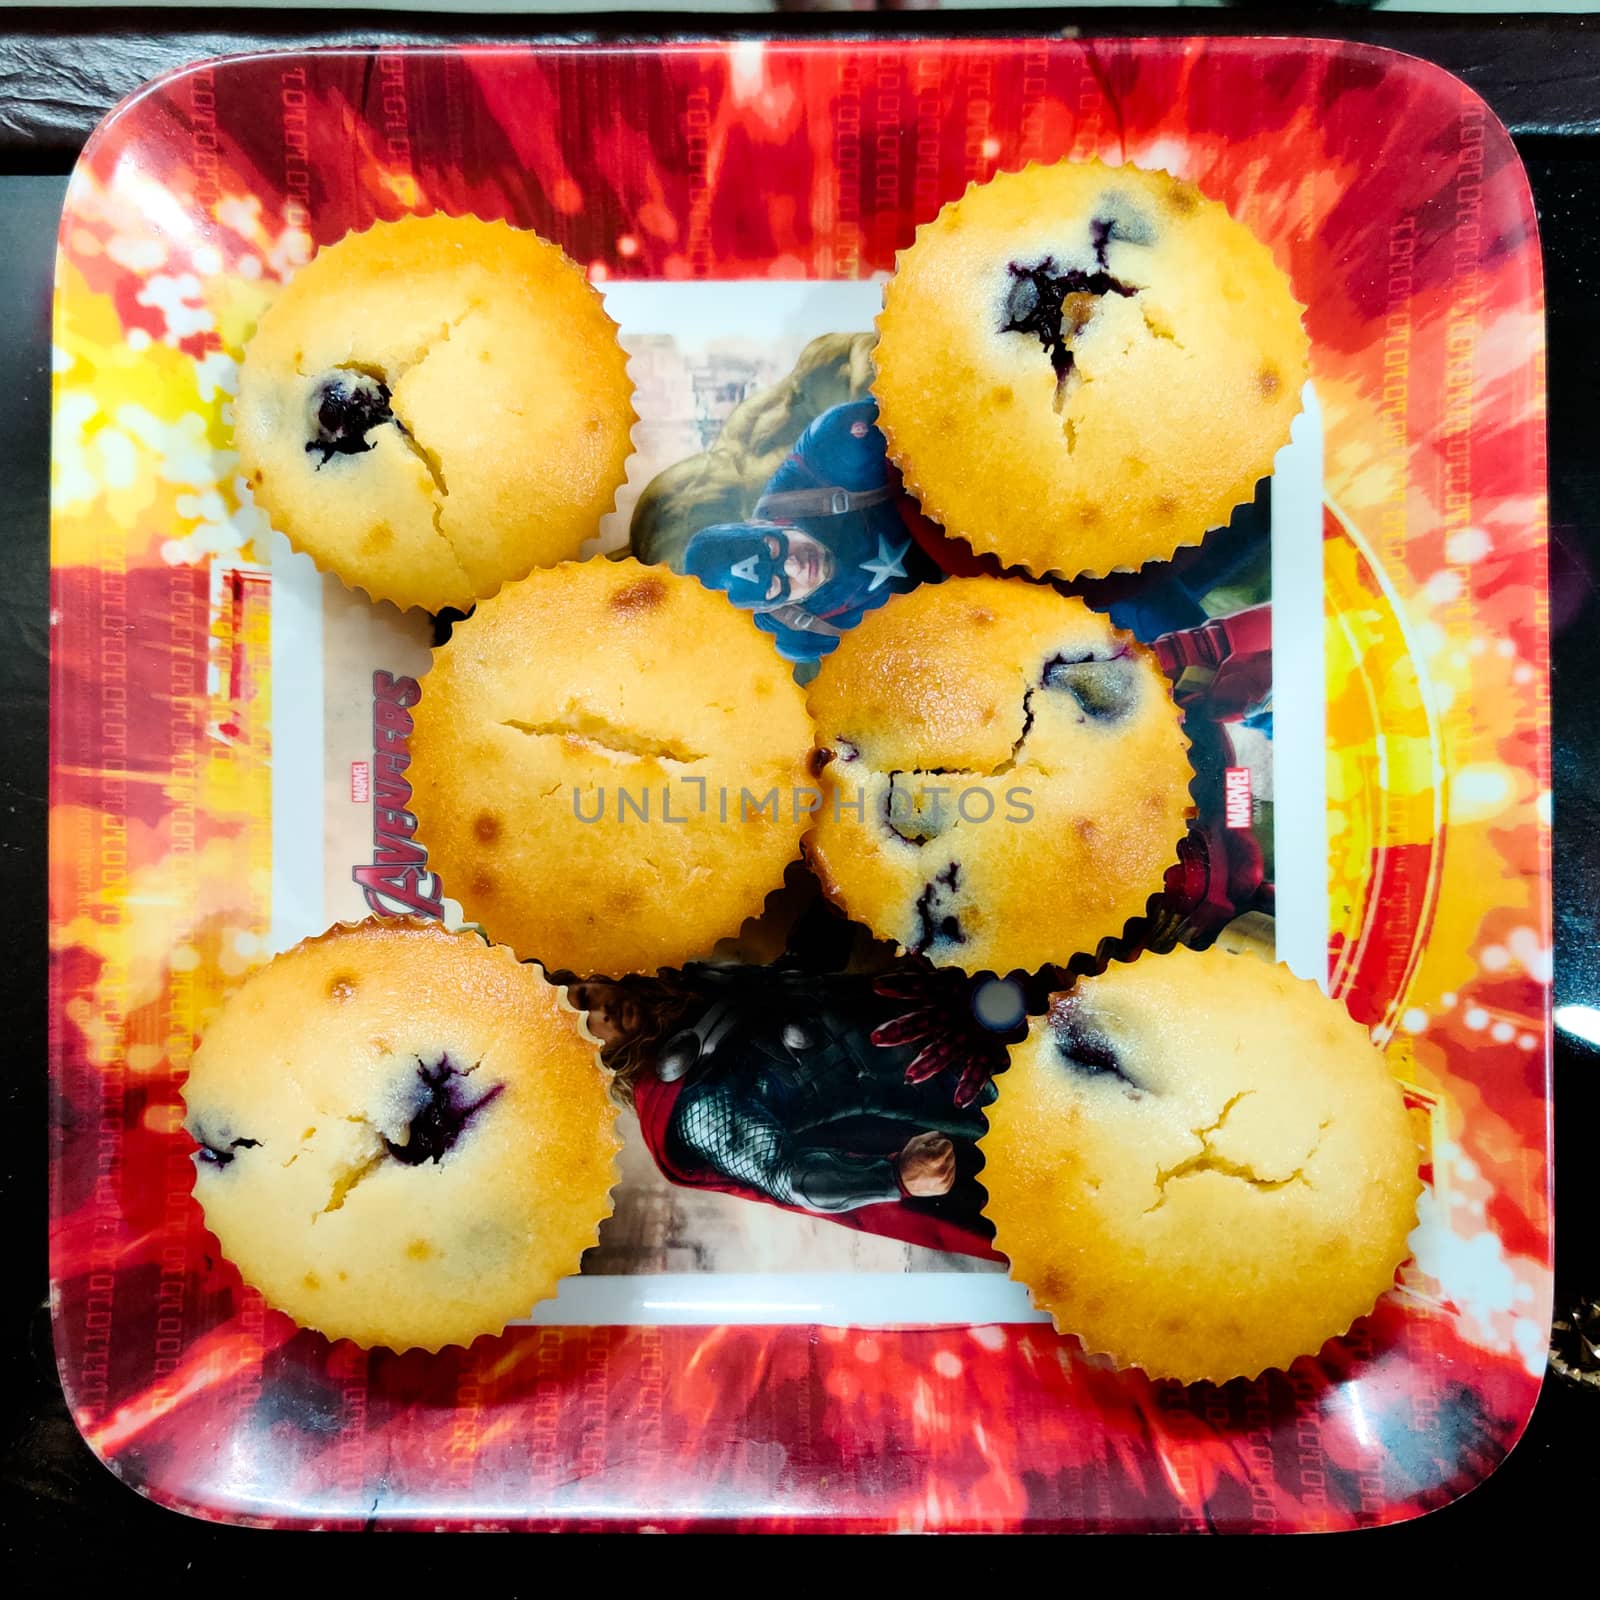 Freshly baked at home muffins in colorful cups placed in a shiny microwave. Shows the renewed interest in cooking due to the coronavirus pandemic lockdown